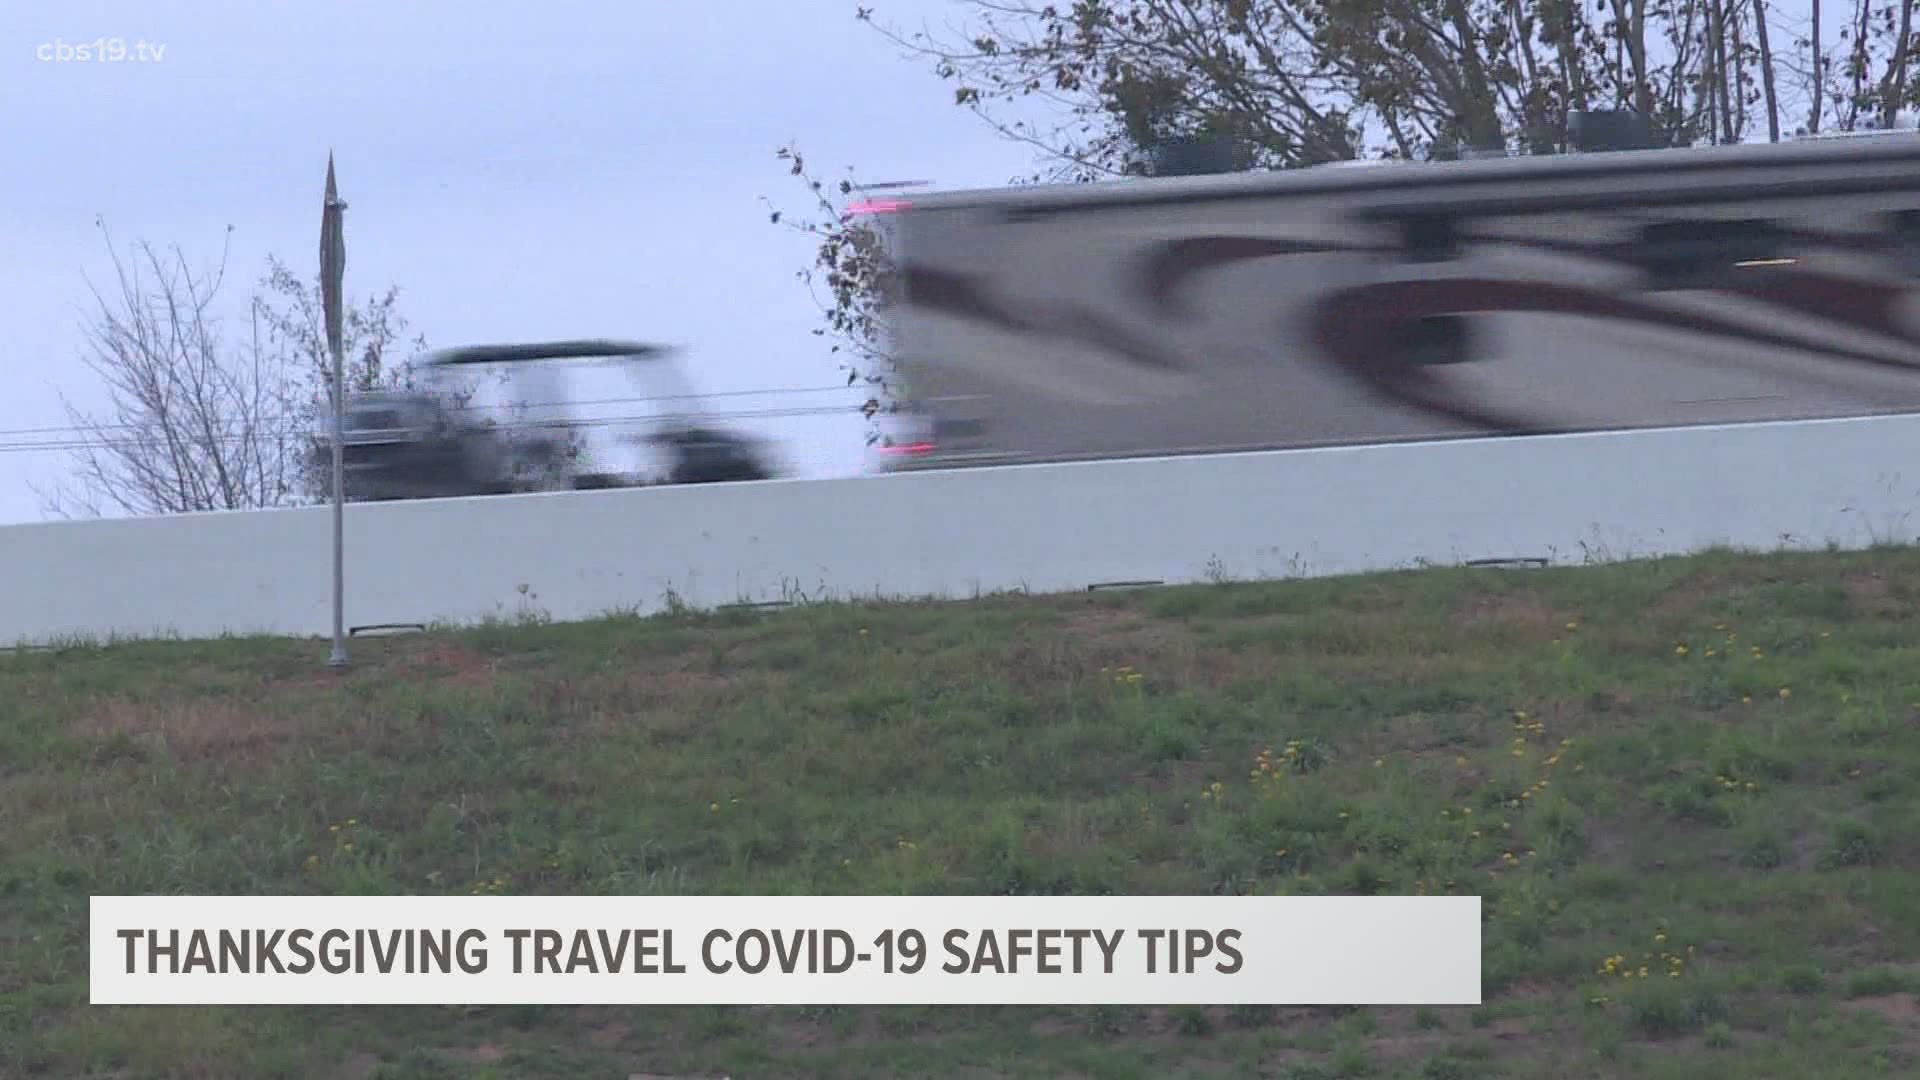 The CDC recommends people not to travel for Thanksgiving but offers COVID-19 precautions for those that do.